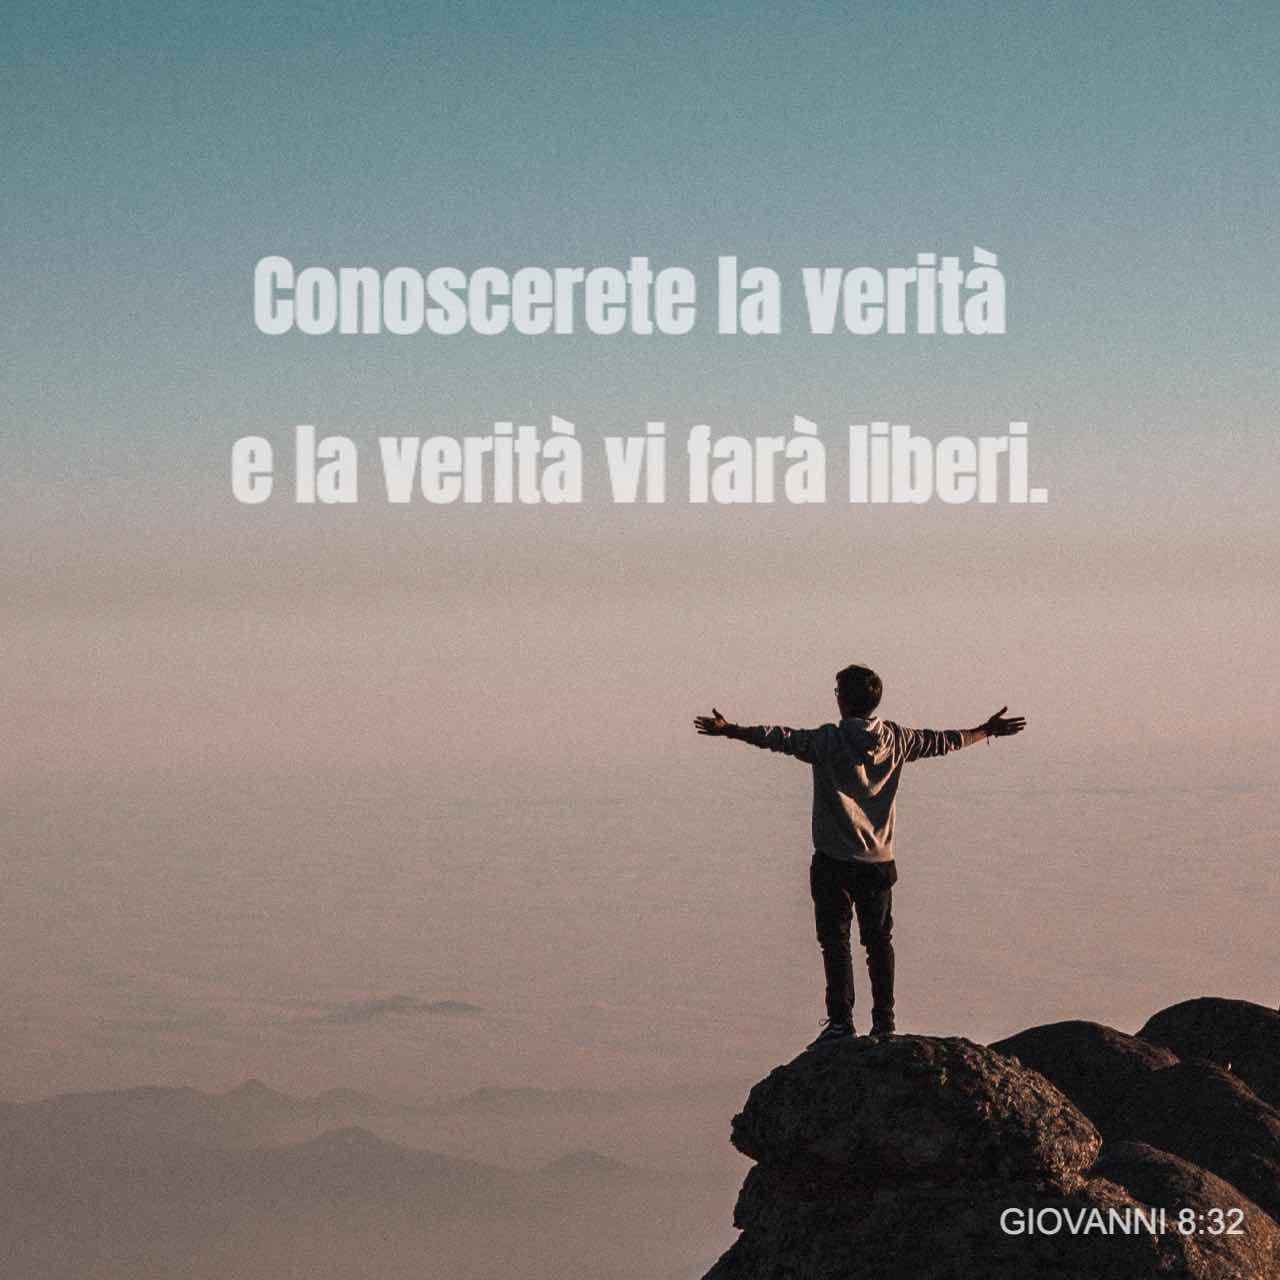 Bible Verse of the Day - day 153 - image 66445 (Vangelo secondo Giovanni 8:32-36)